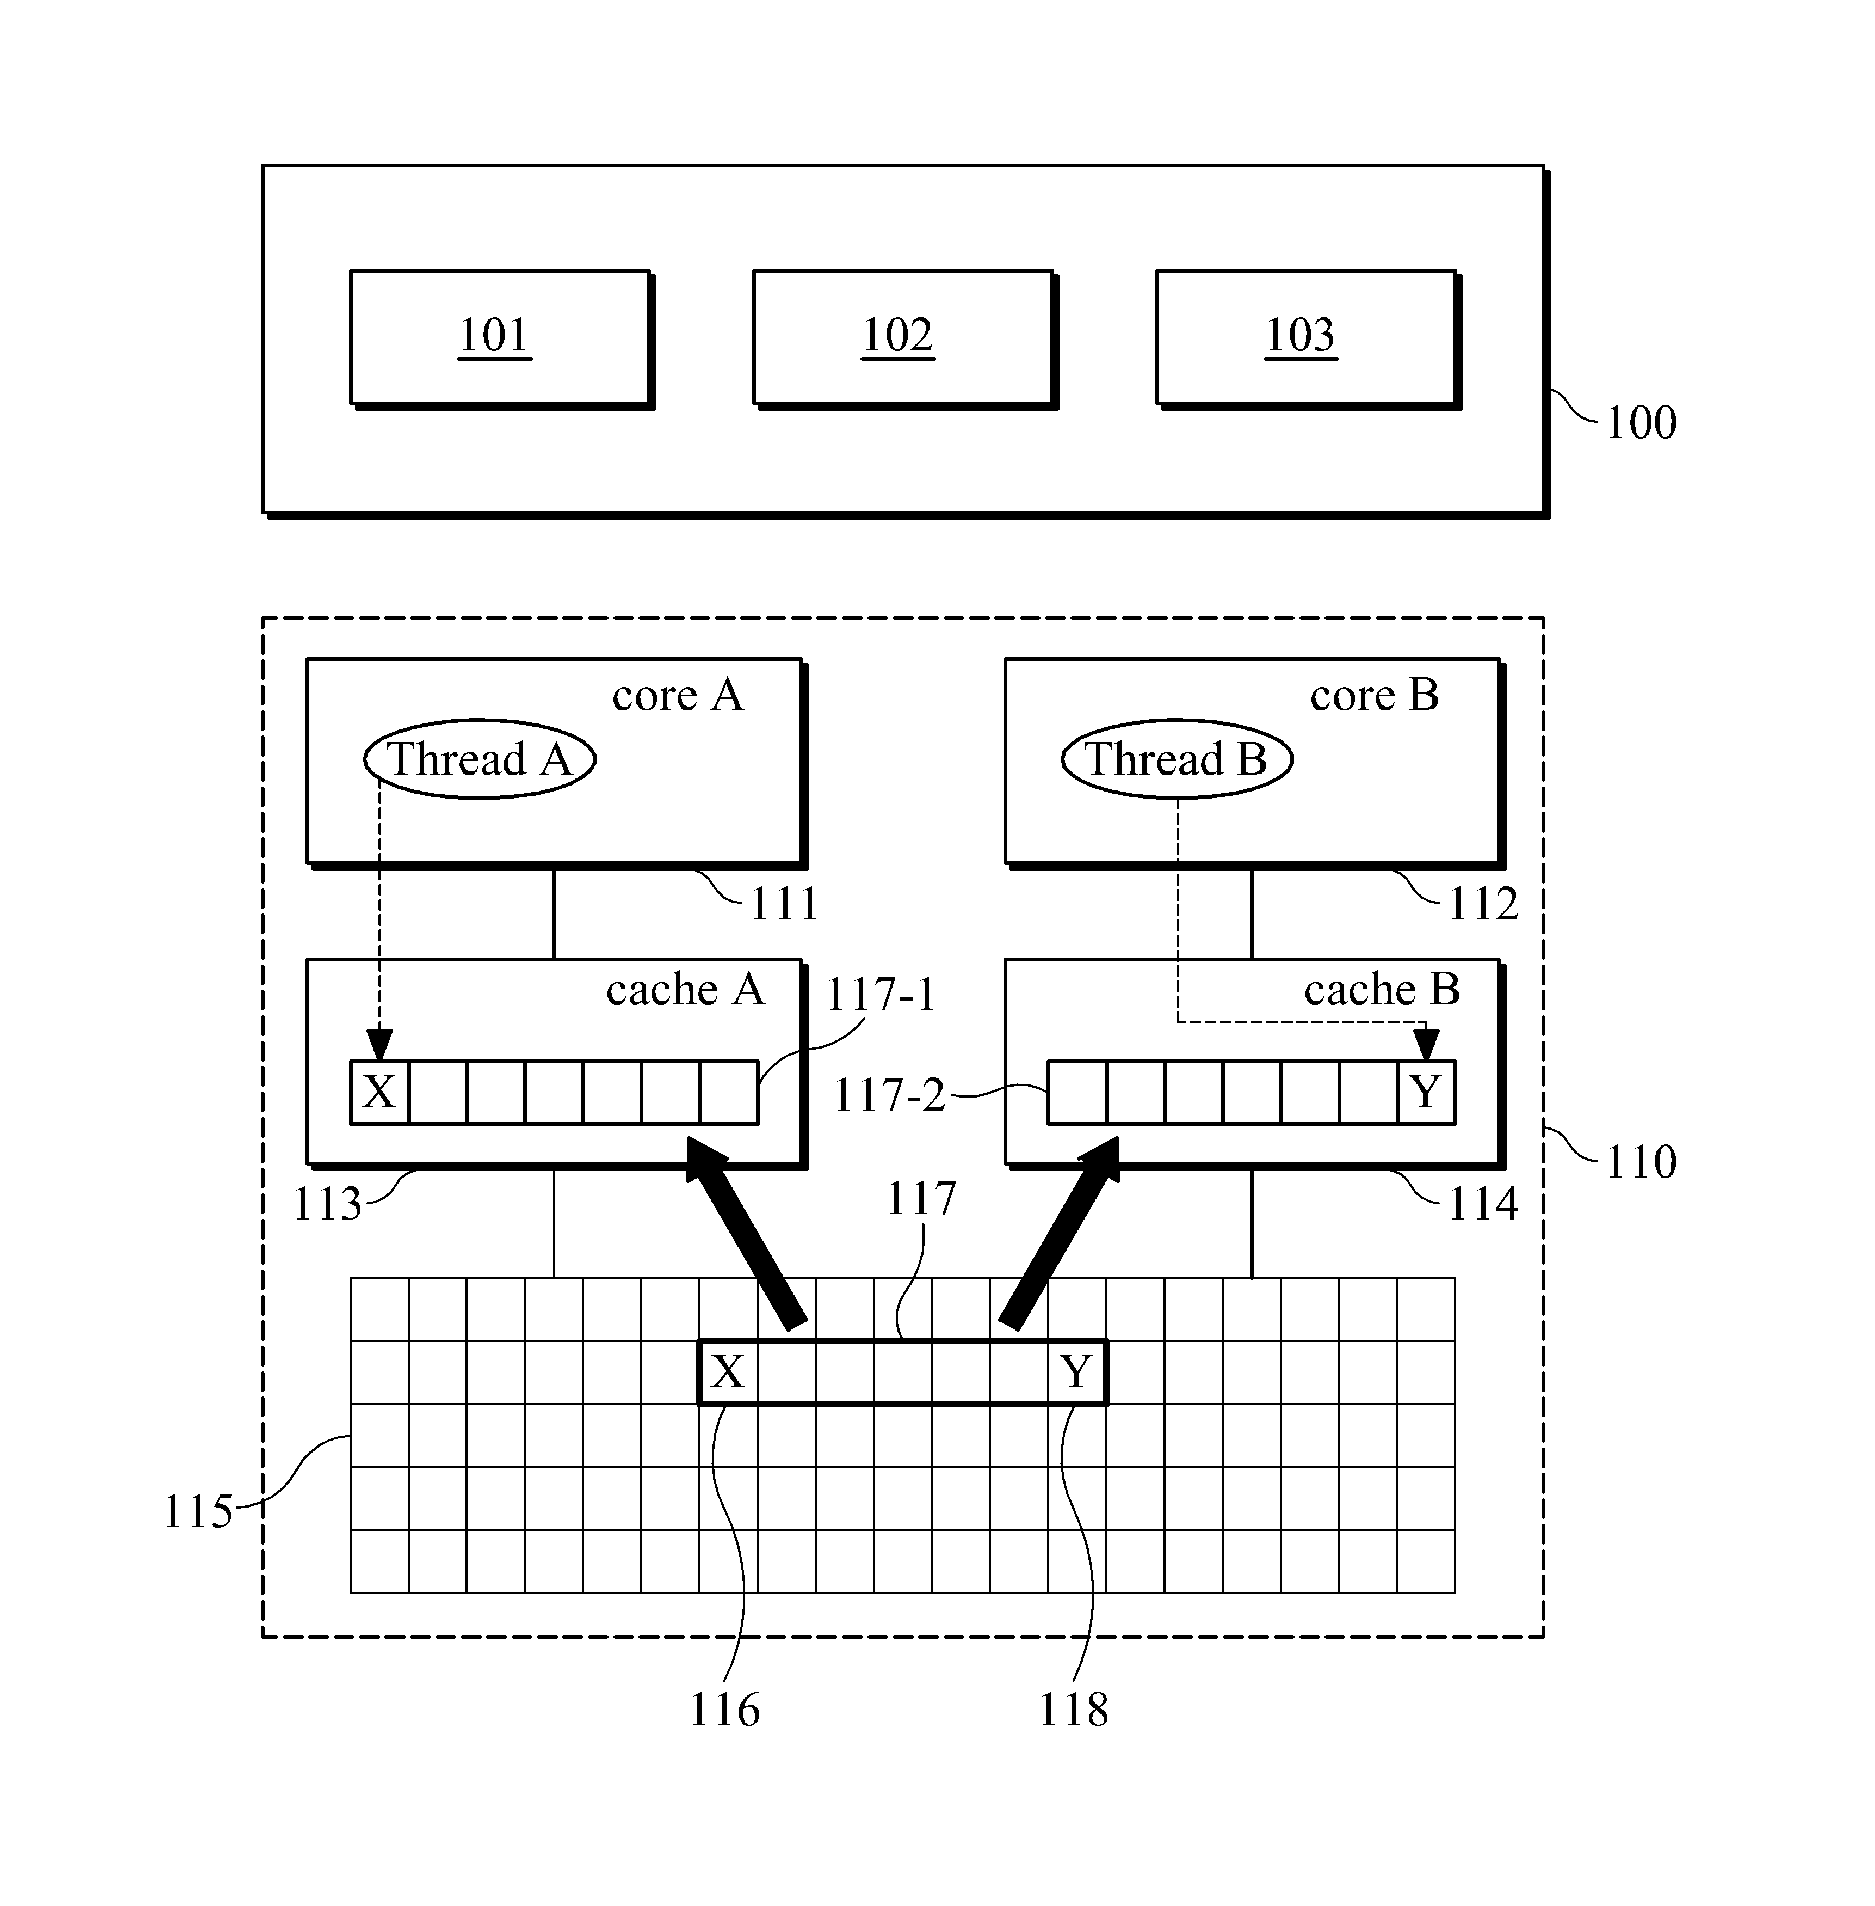 Apparatus and method for detecting false sharing